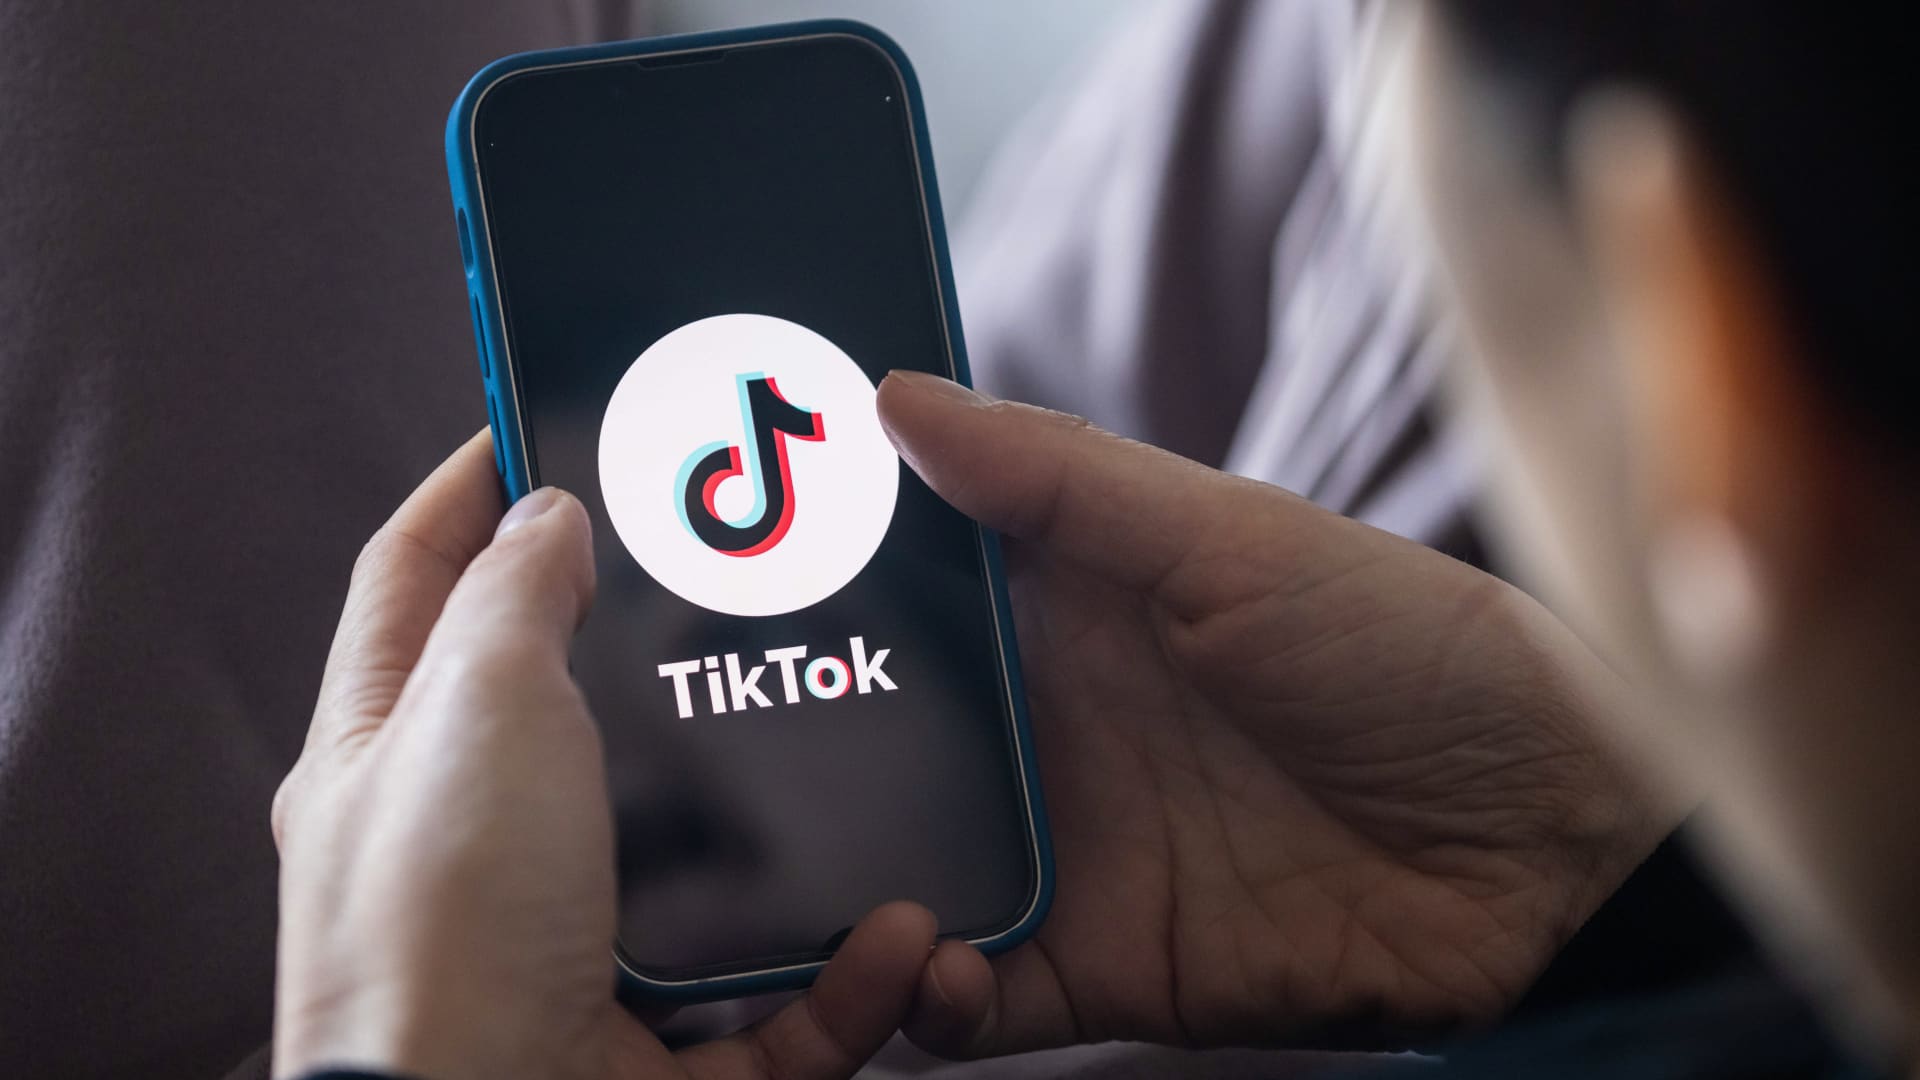 Senators to launch bill that will help ban or prohibit foreign technology like TikTok